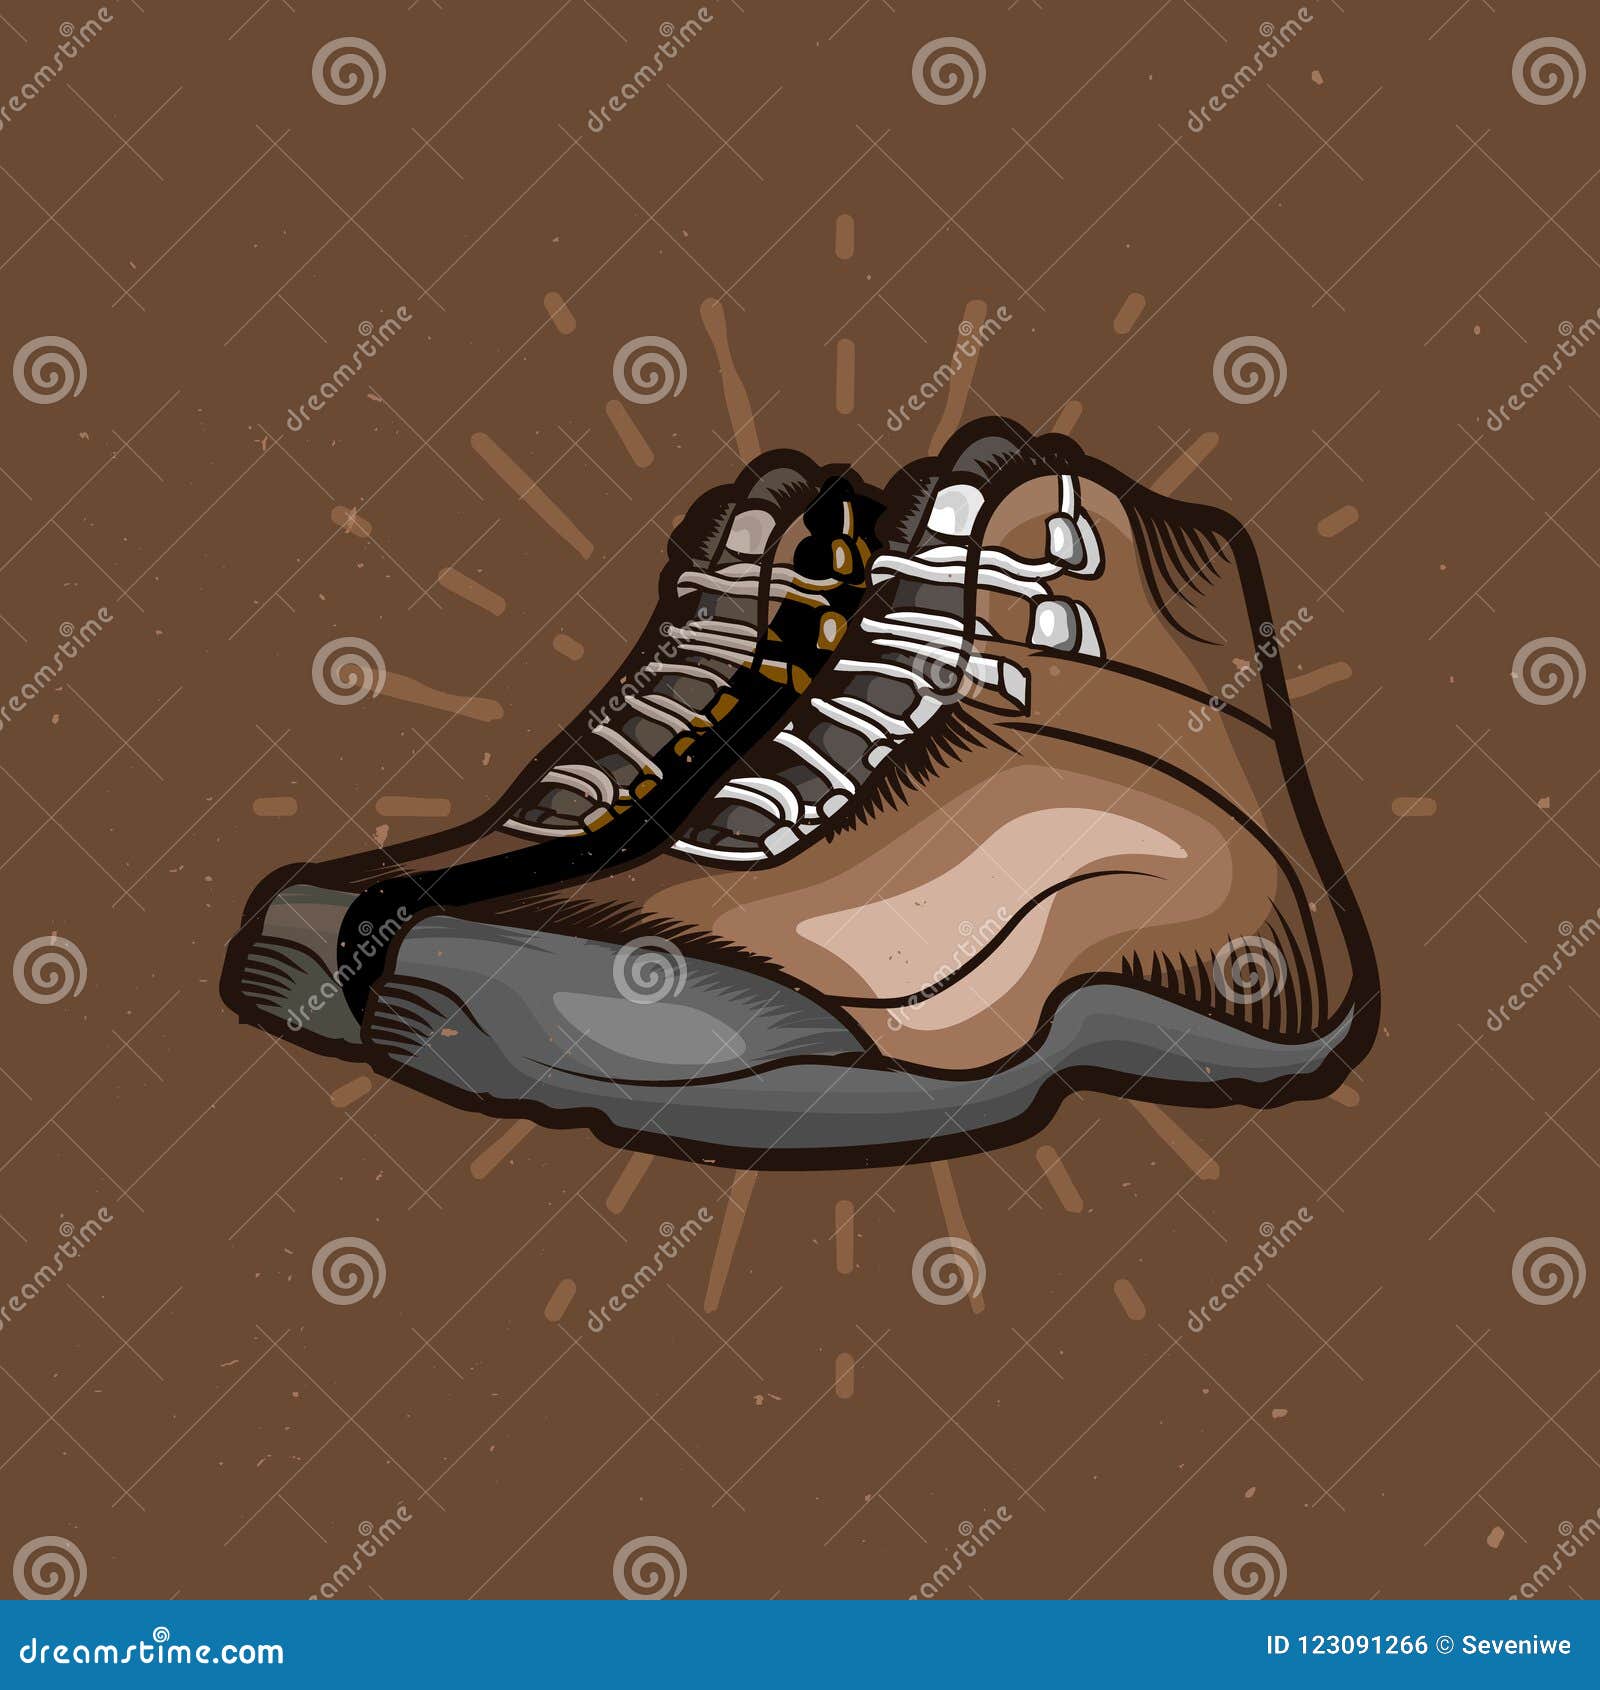 Vector Cartoon Hiking Shoes. Trekking Boots with Sunburst on the Background  Stock Vector - Illustration of navigation, mountaineering: 123091266